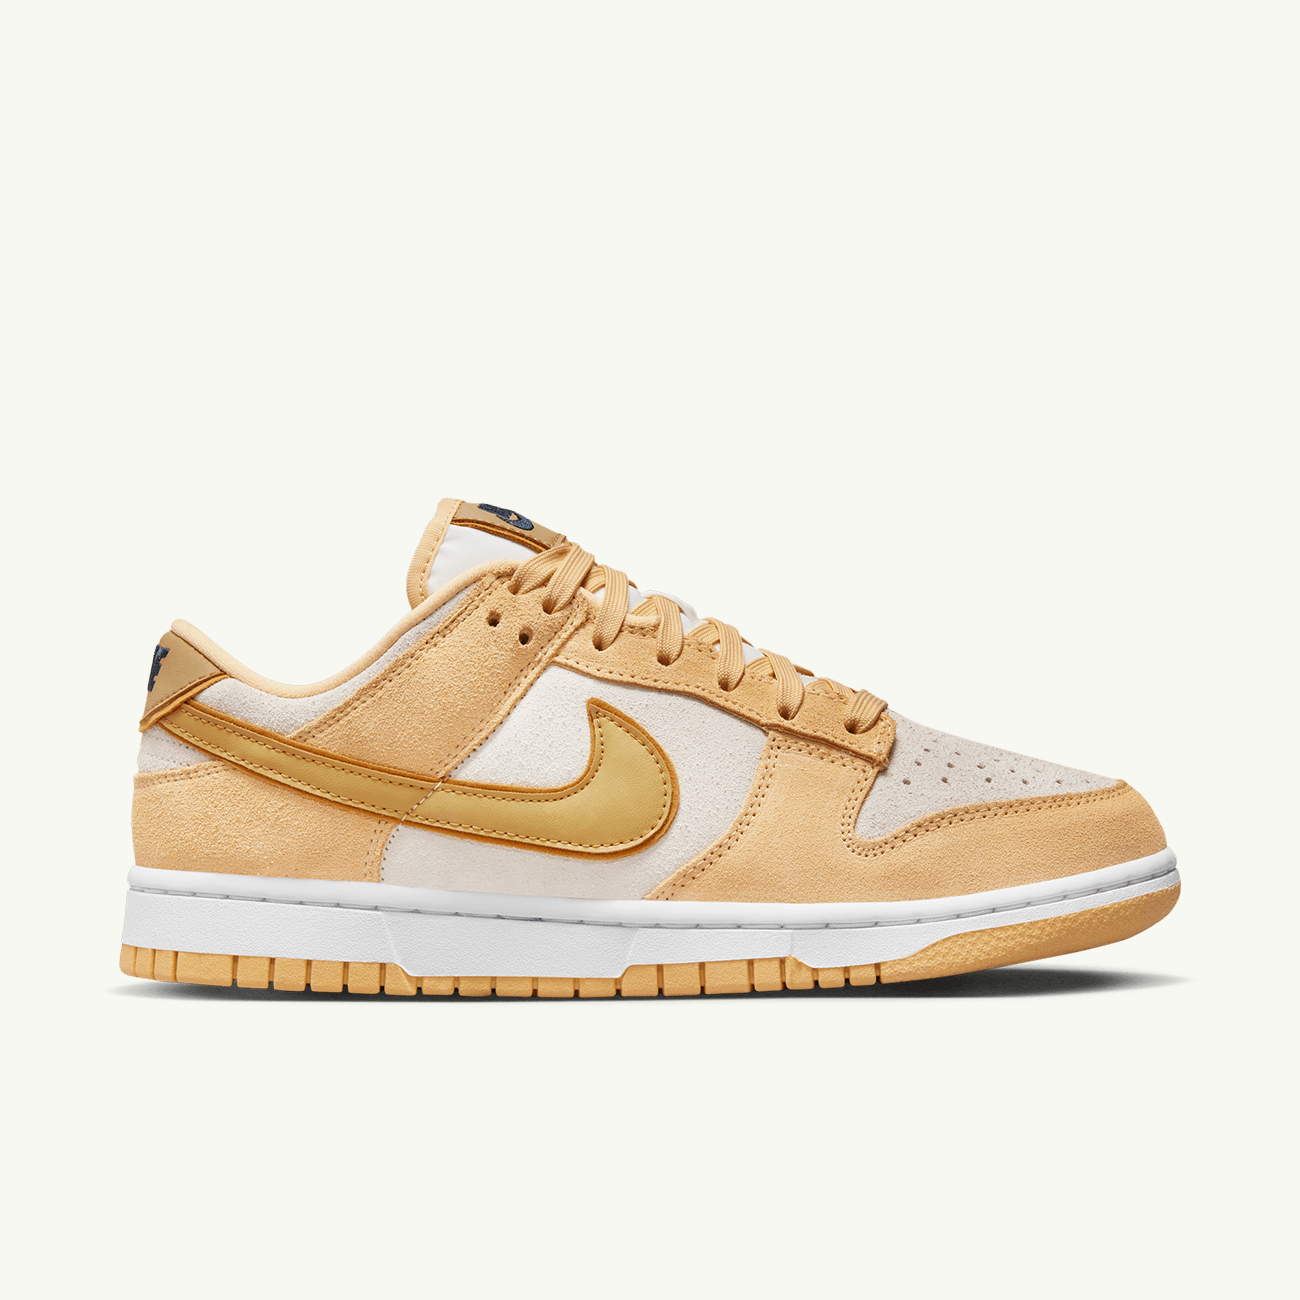 WOMENS DUNK LOW LX CELESTIAL GOLD WHEAT GOLD SAIL